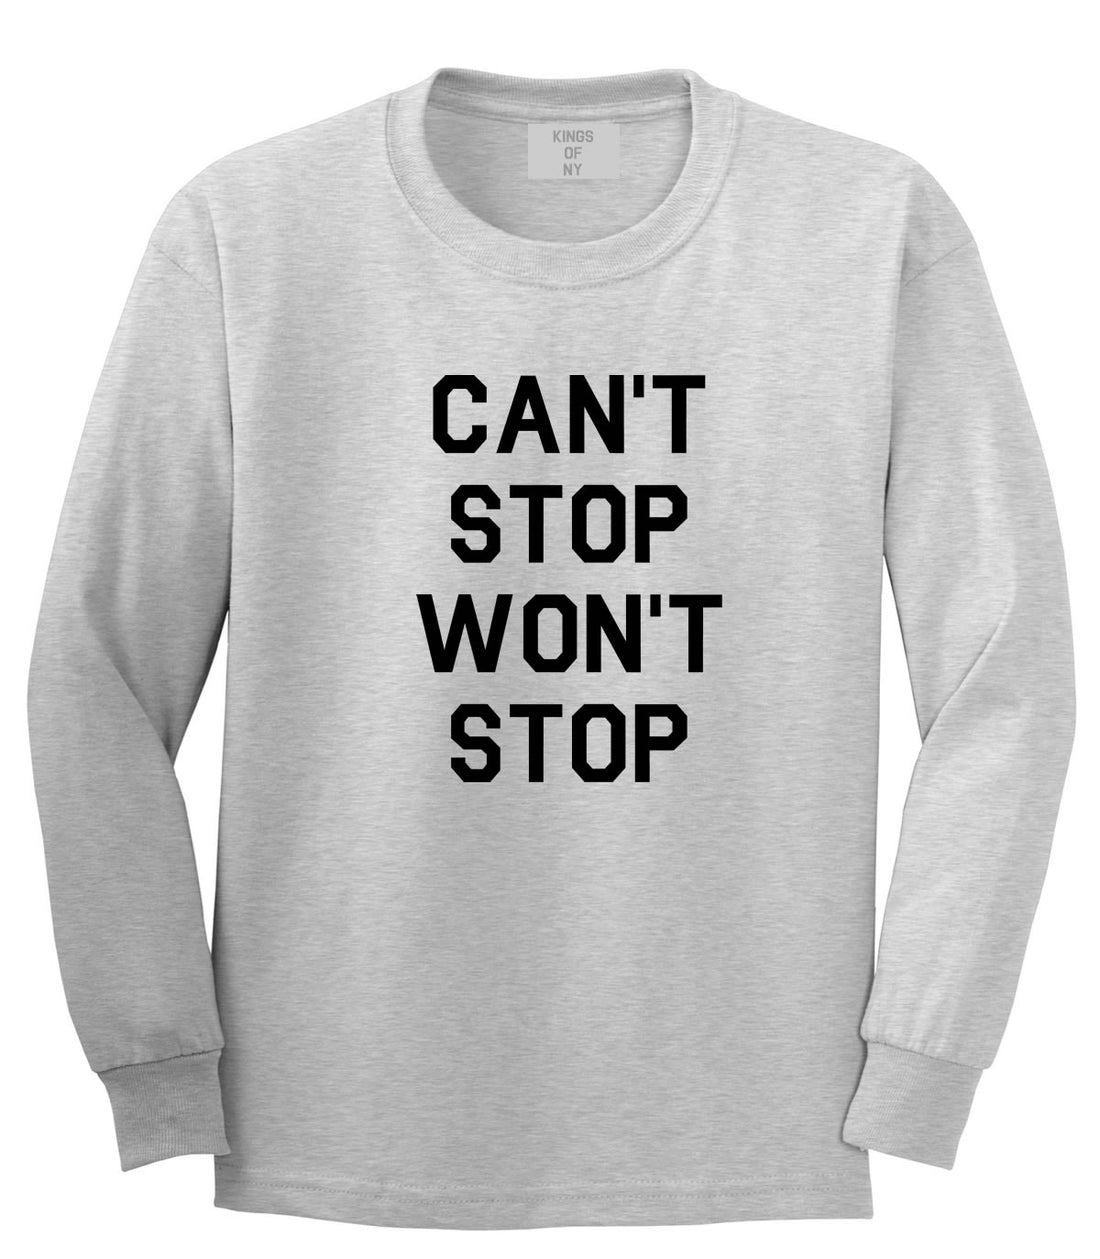  Kings Of NY Cant Stop Wont Stop Long Sleeve T-Shirt in Grey